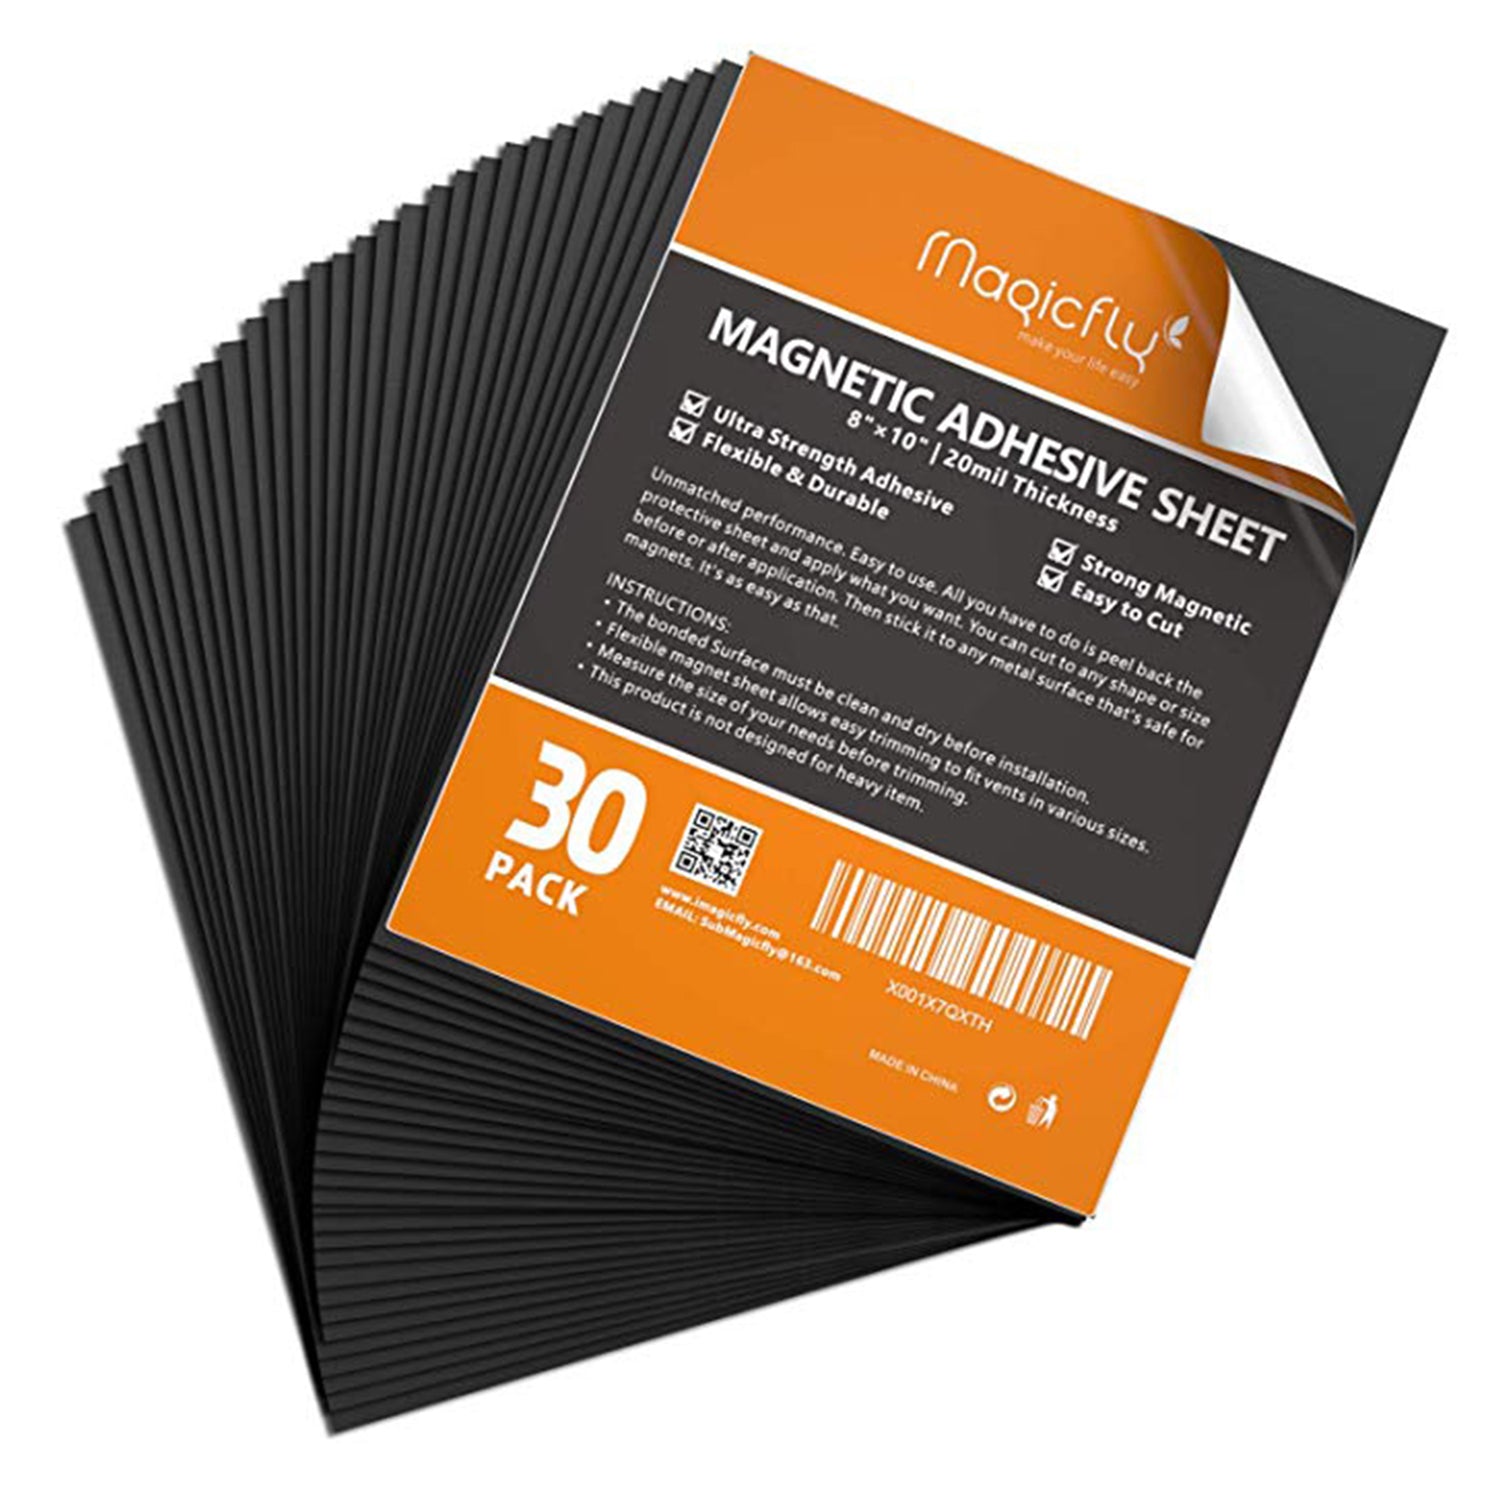 3 x 4 (20 mil) Magnetic Adhesive Magnet Sheets